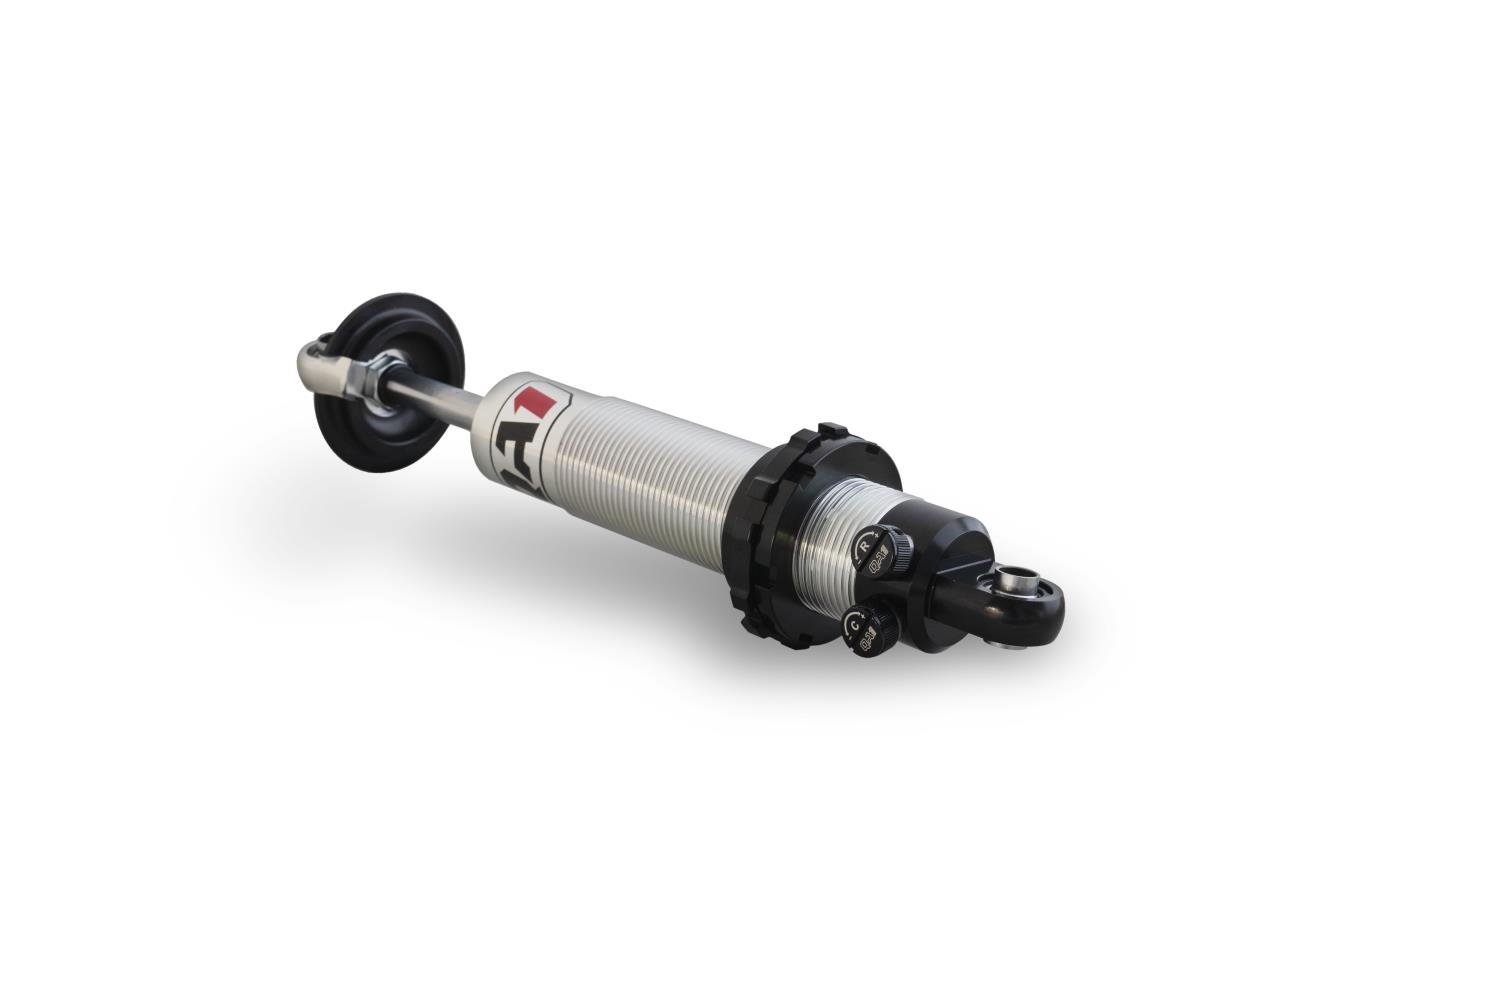 DD501 Double Adjustable Shock Compressed Height: 11-5/8"